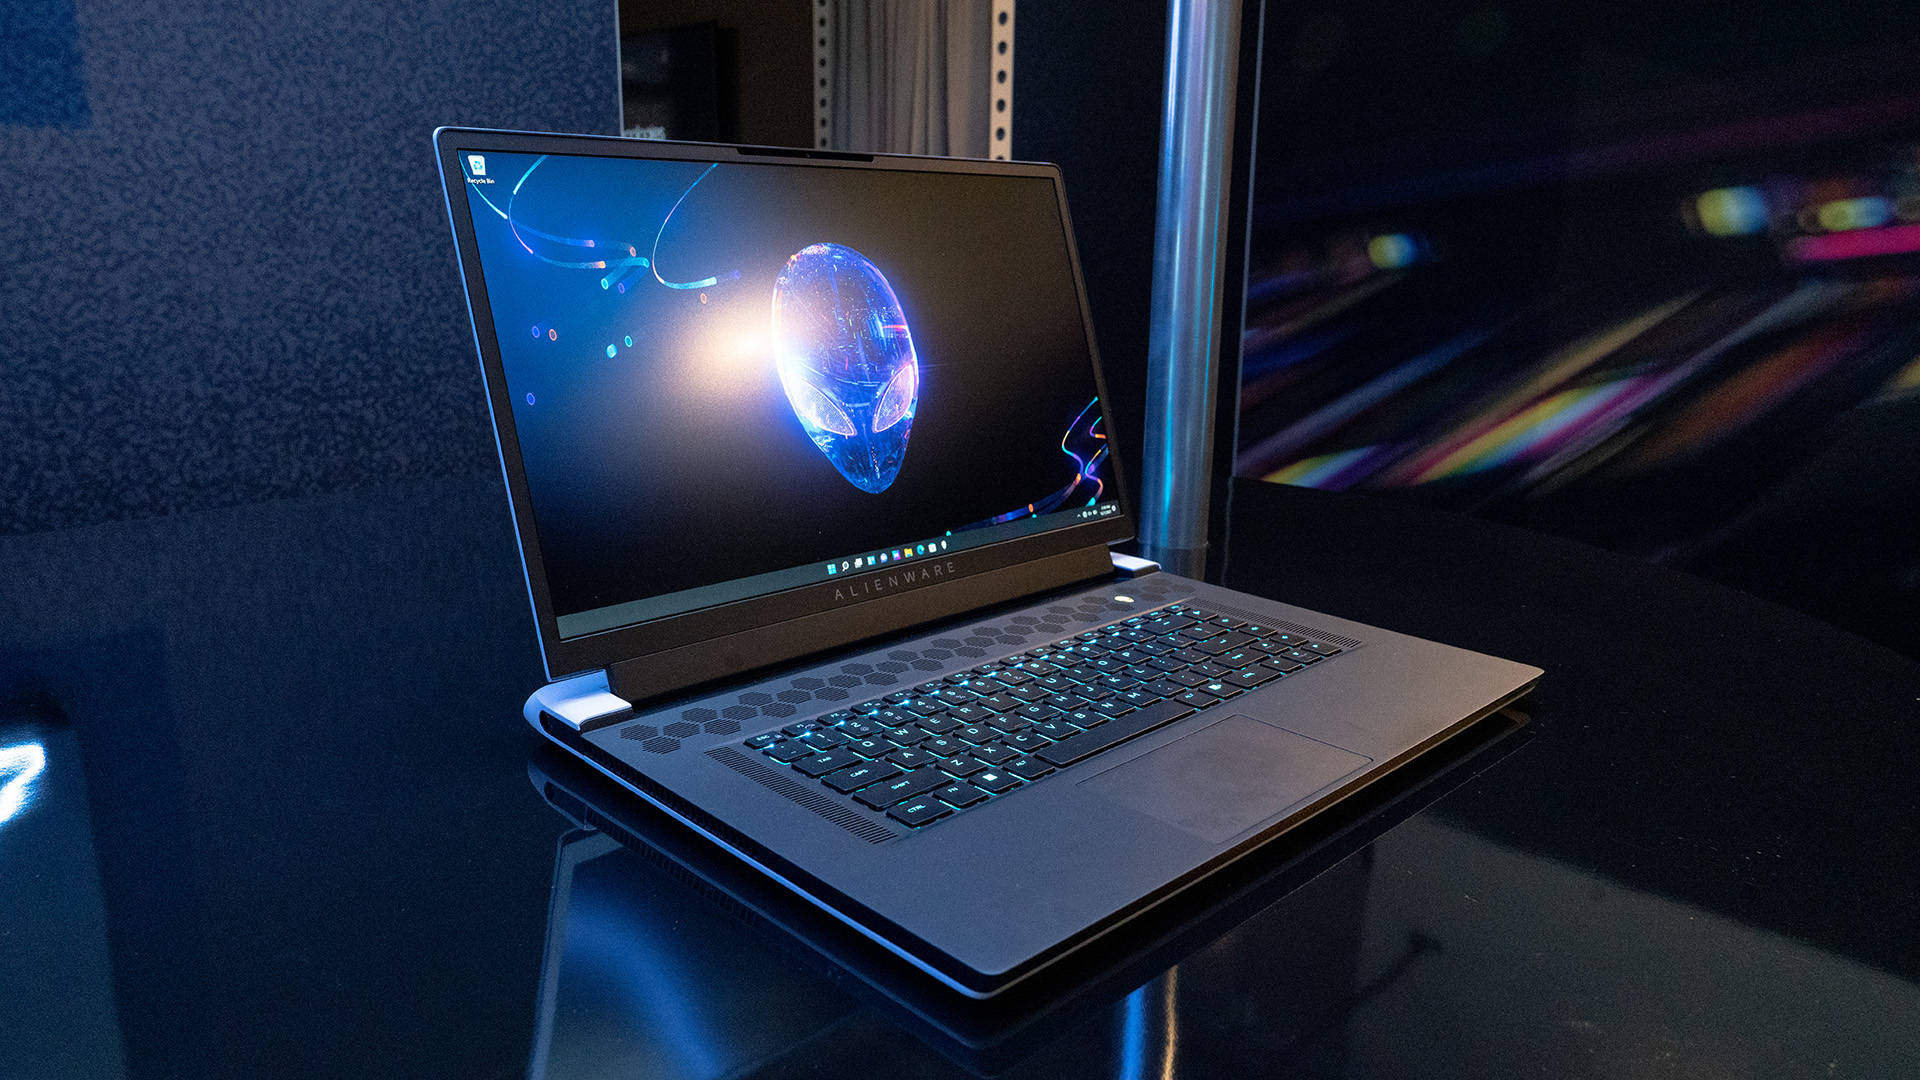 Alienware 17 review: A little slimmer and lighter, but still not